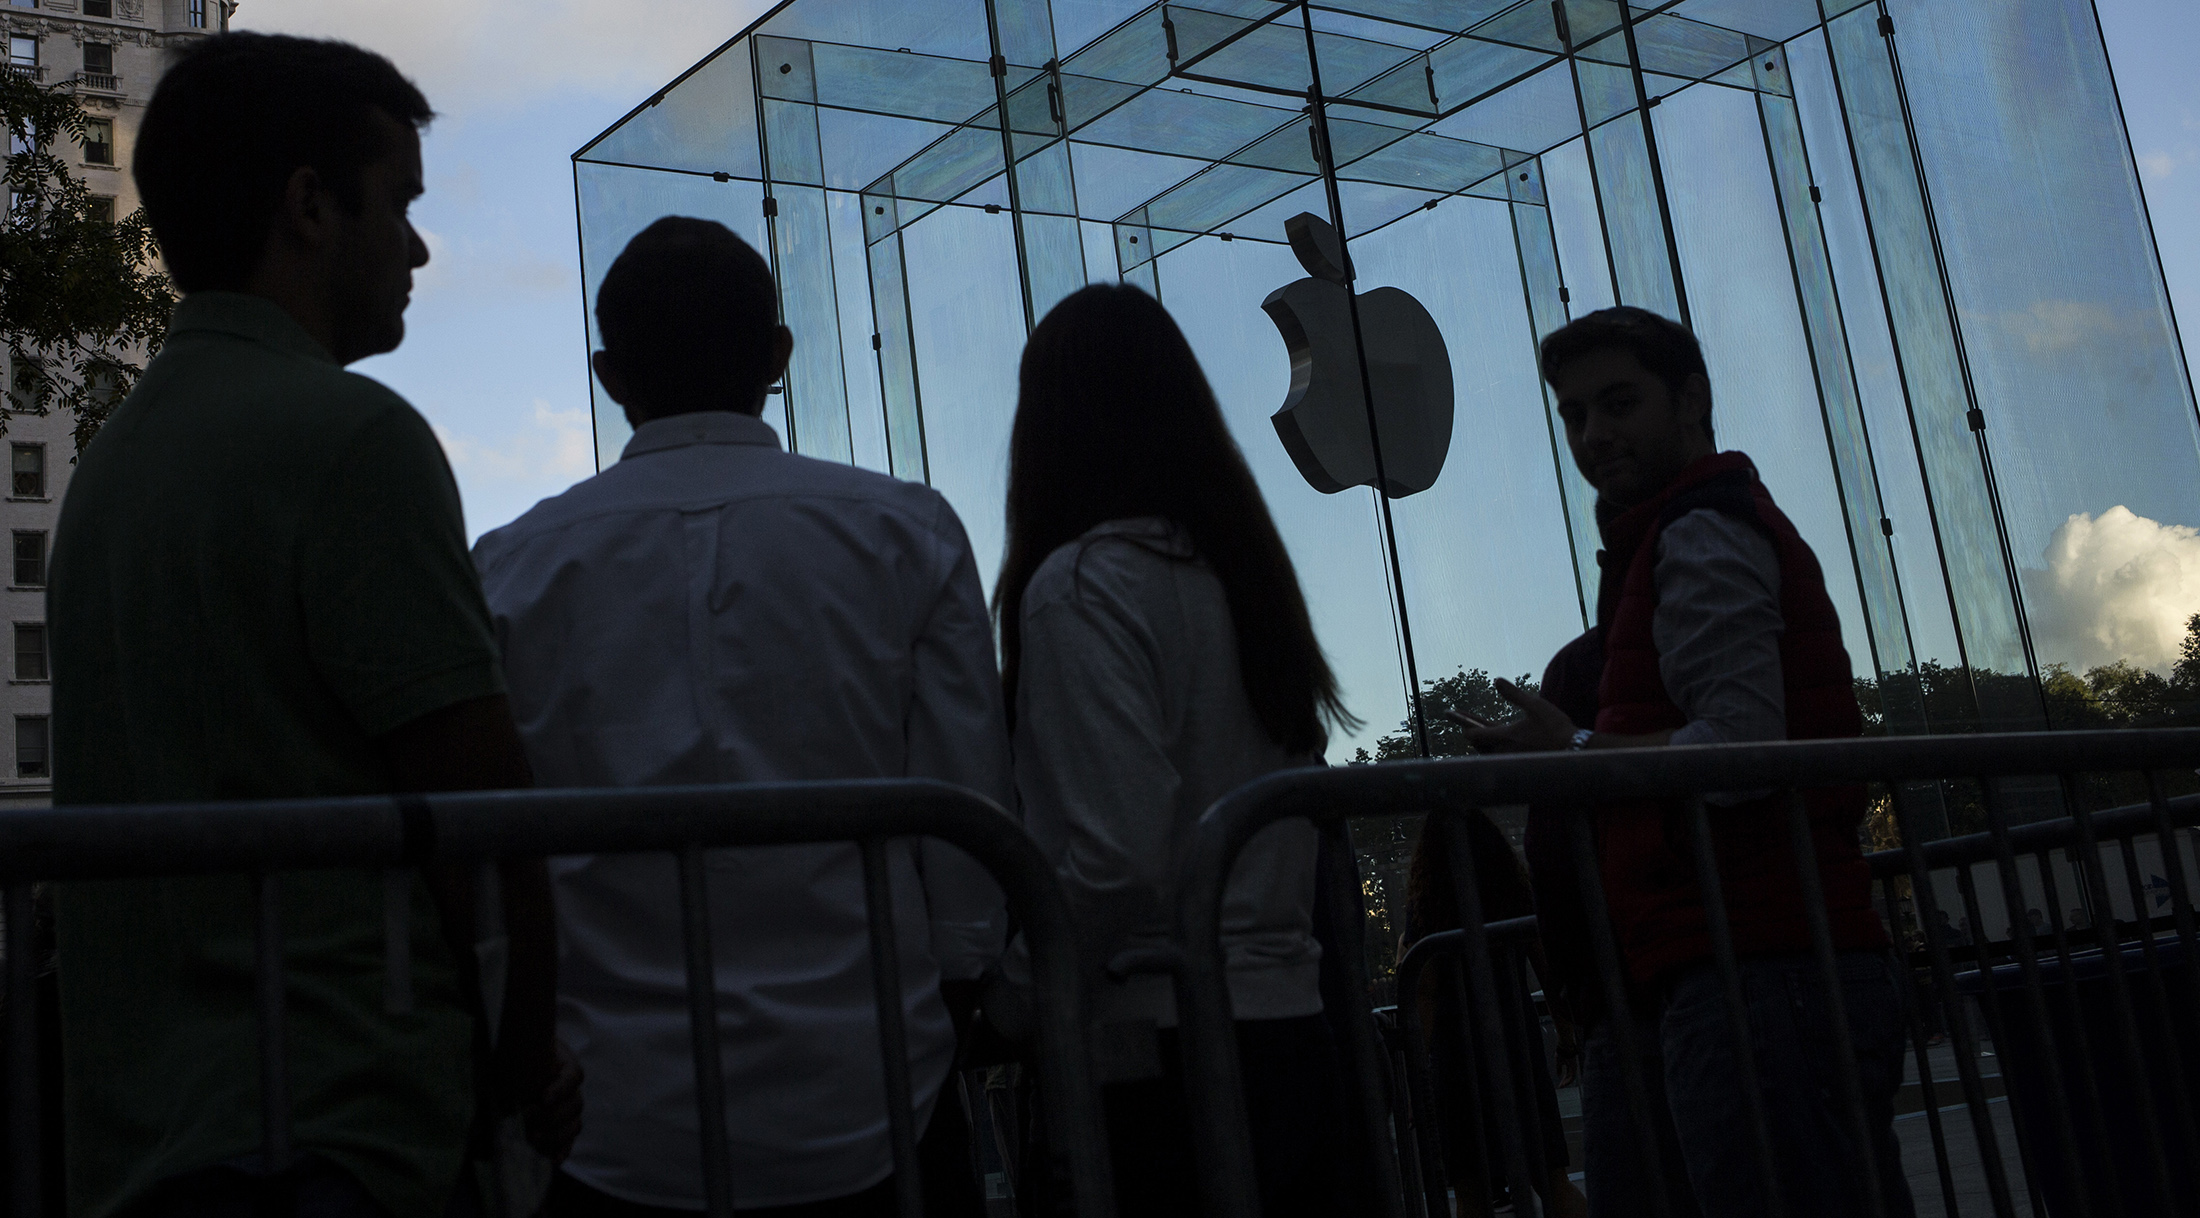 Customers wait in line for the iPhone 7 smartphone outside an Apple Inc. store in New York, U.S., on Friday, Sept. 16, 2016.
